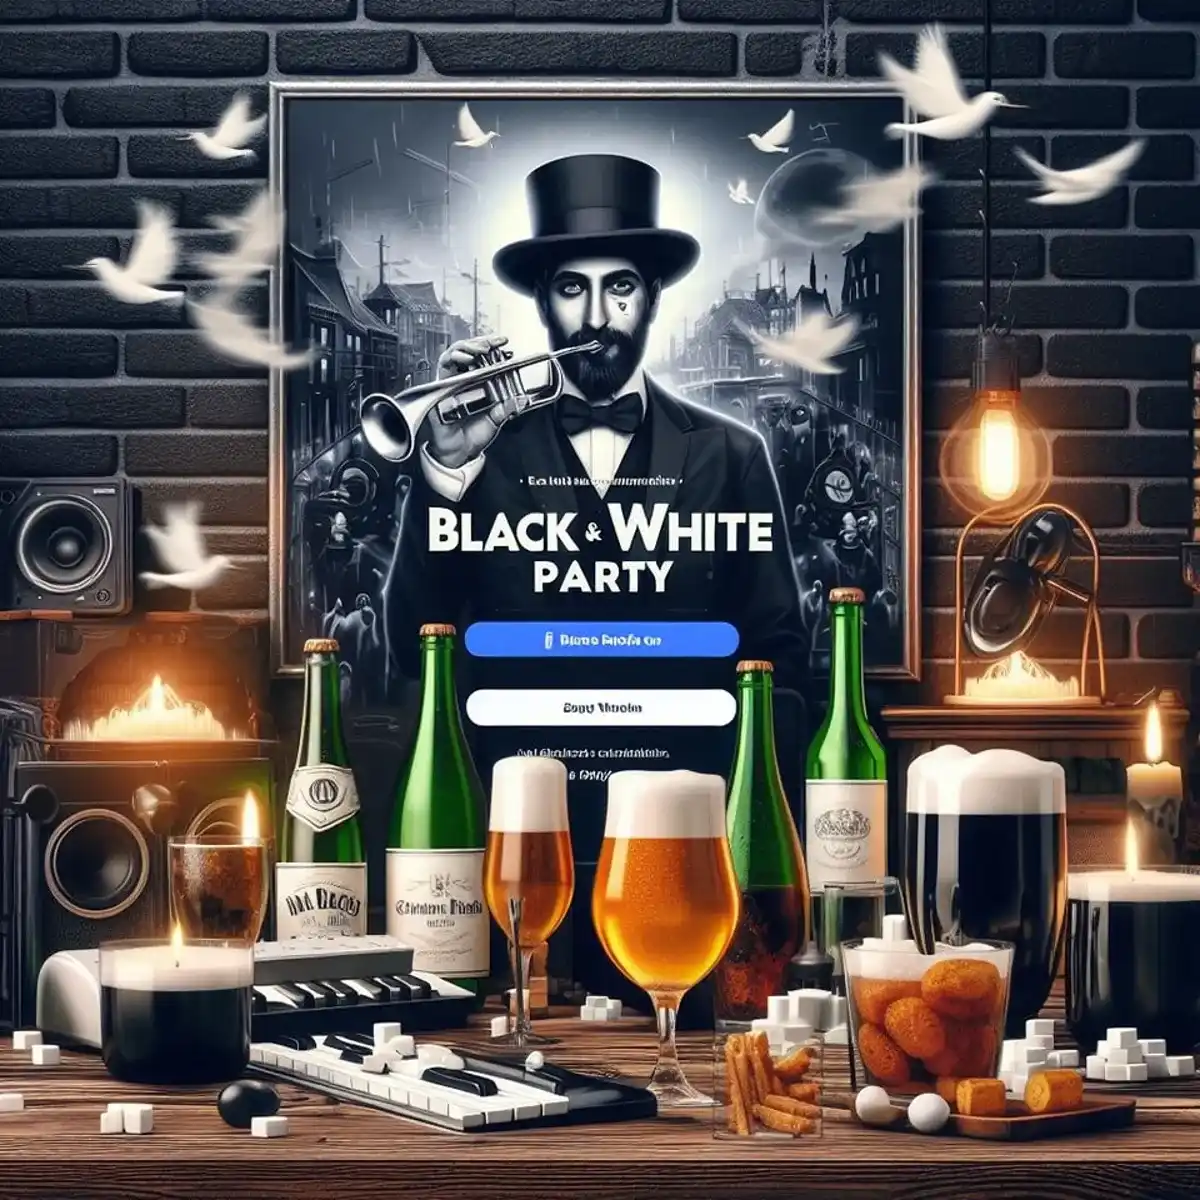 The Black & White Party